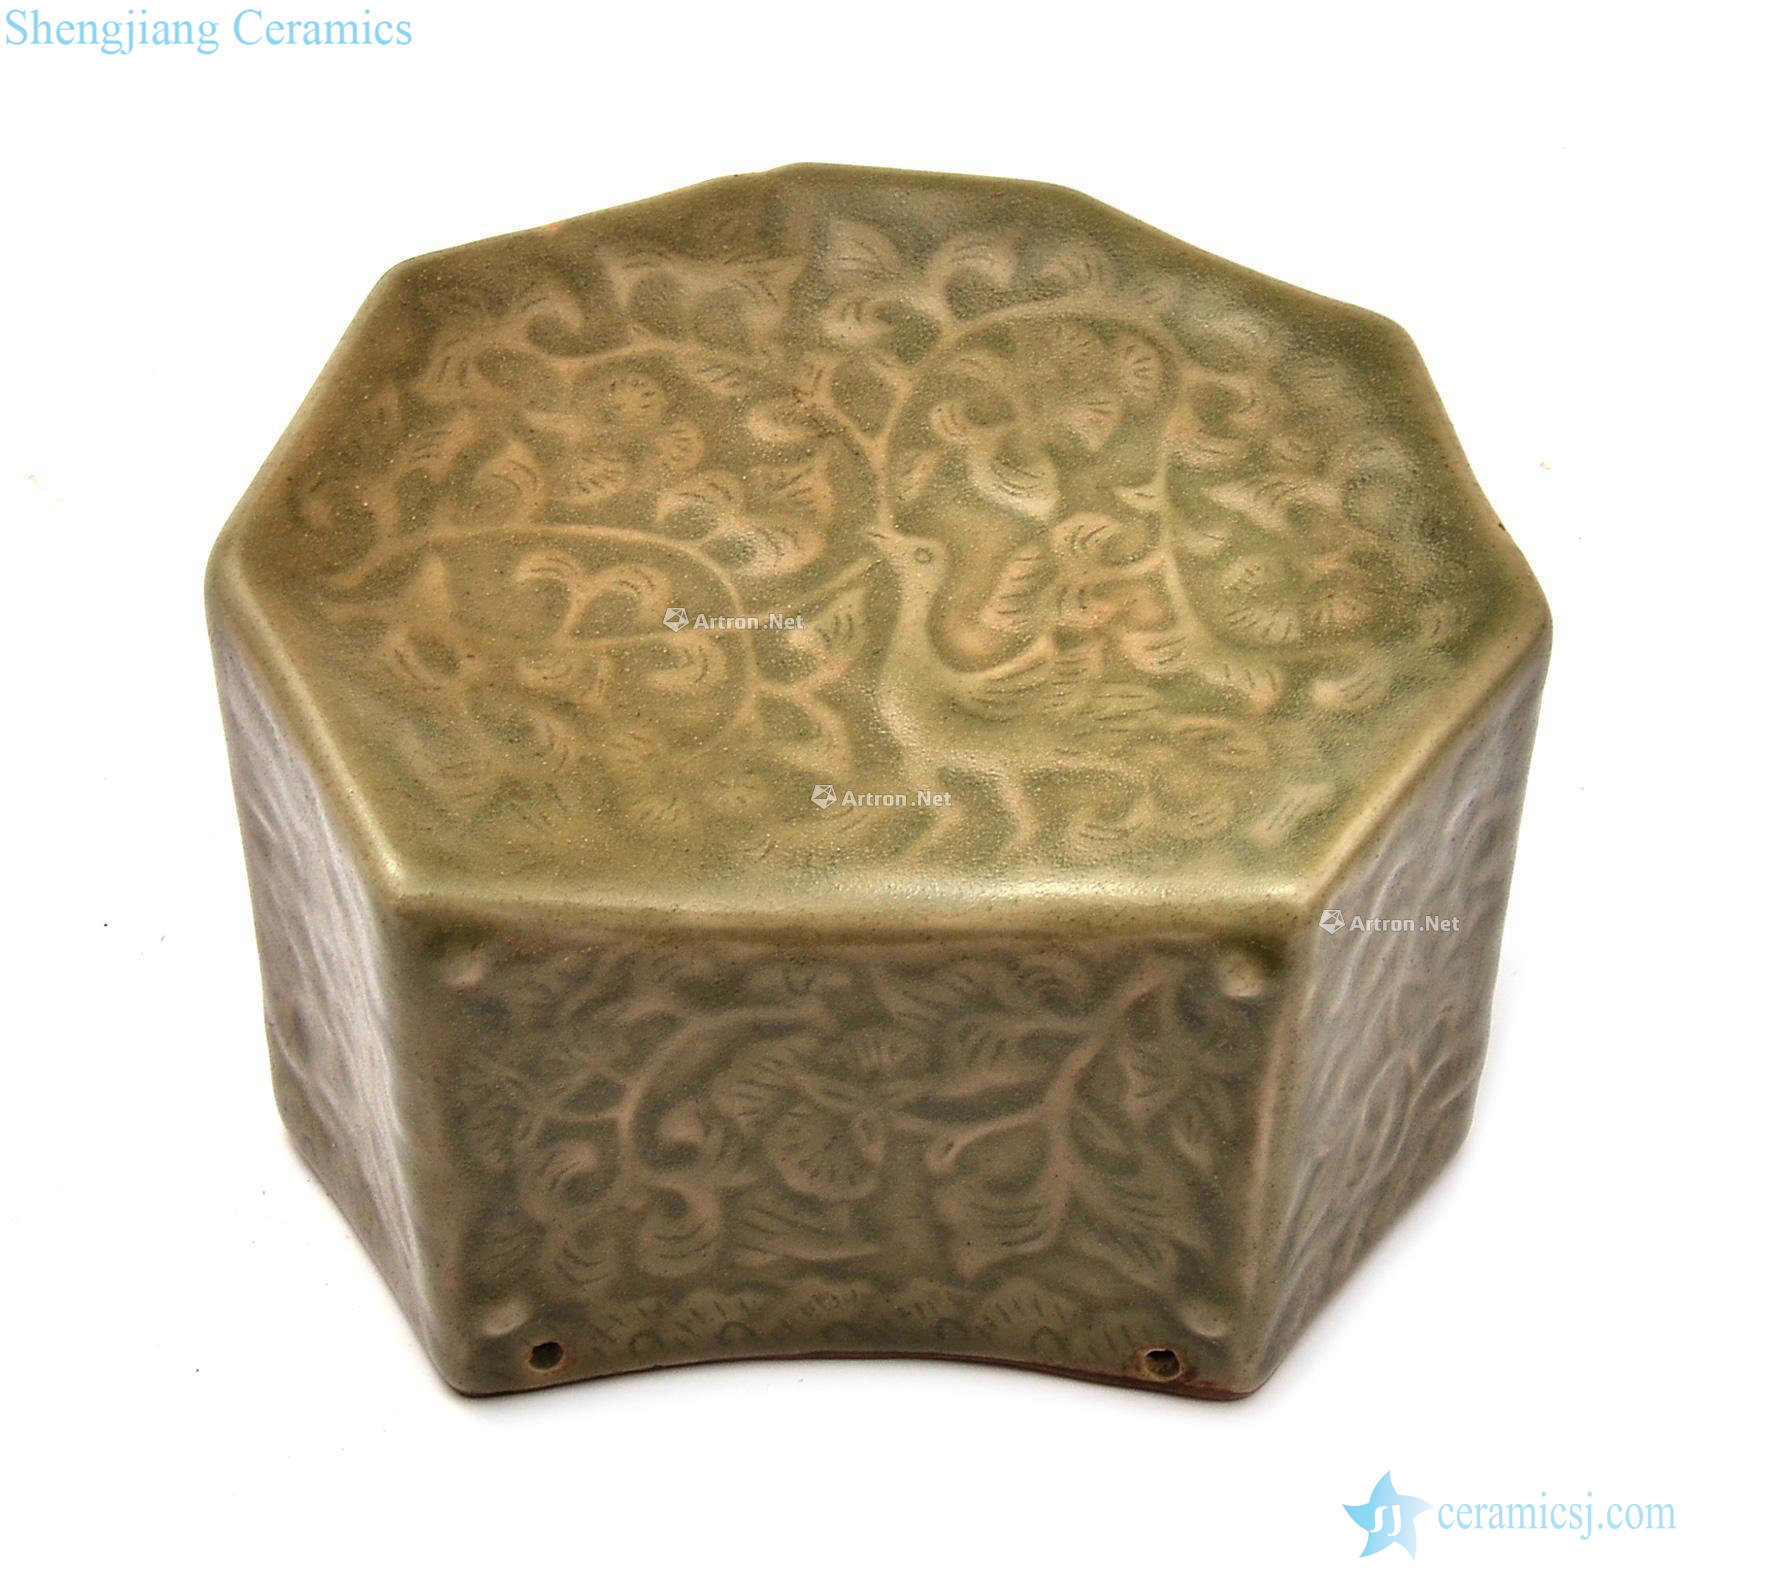 The song dynasty Yao state green glazed carved porcelain pillow